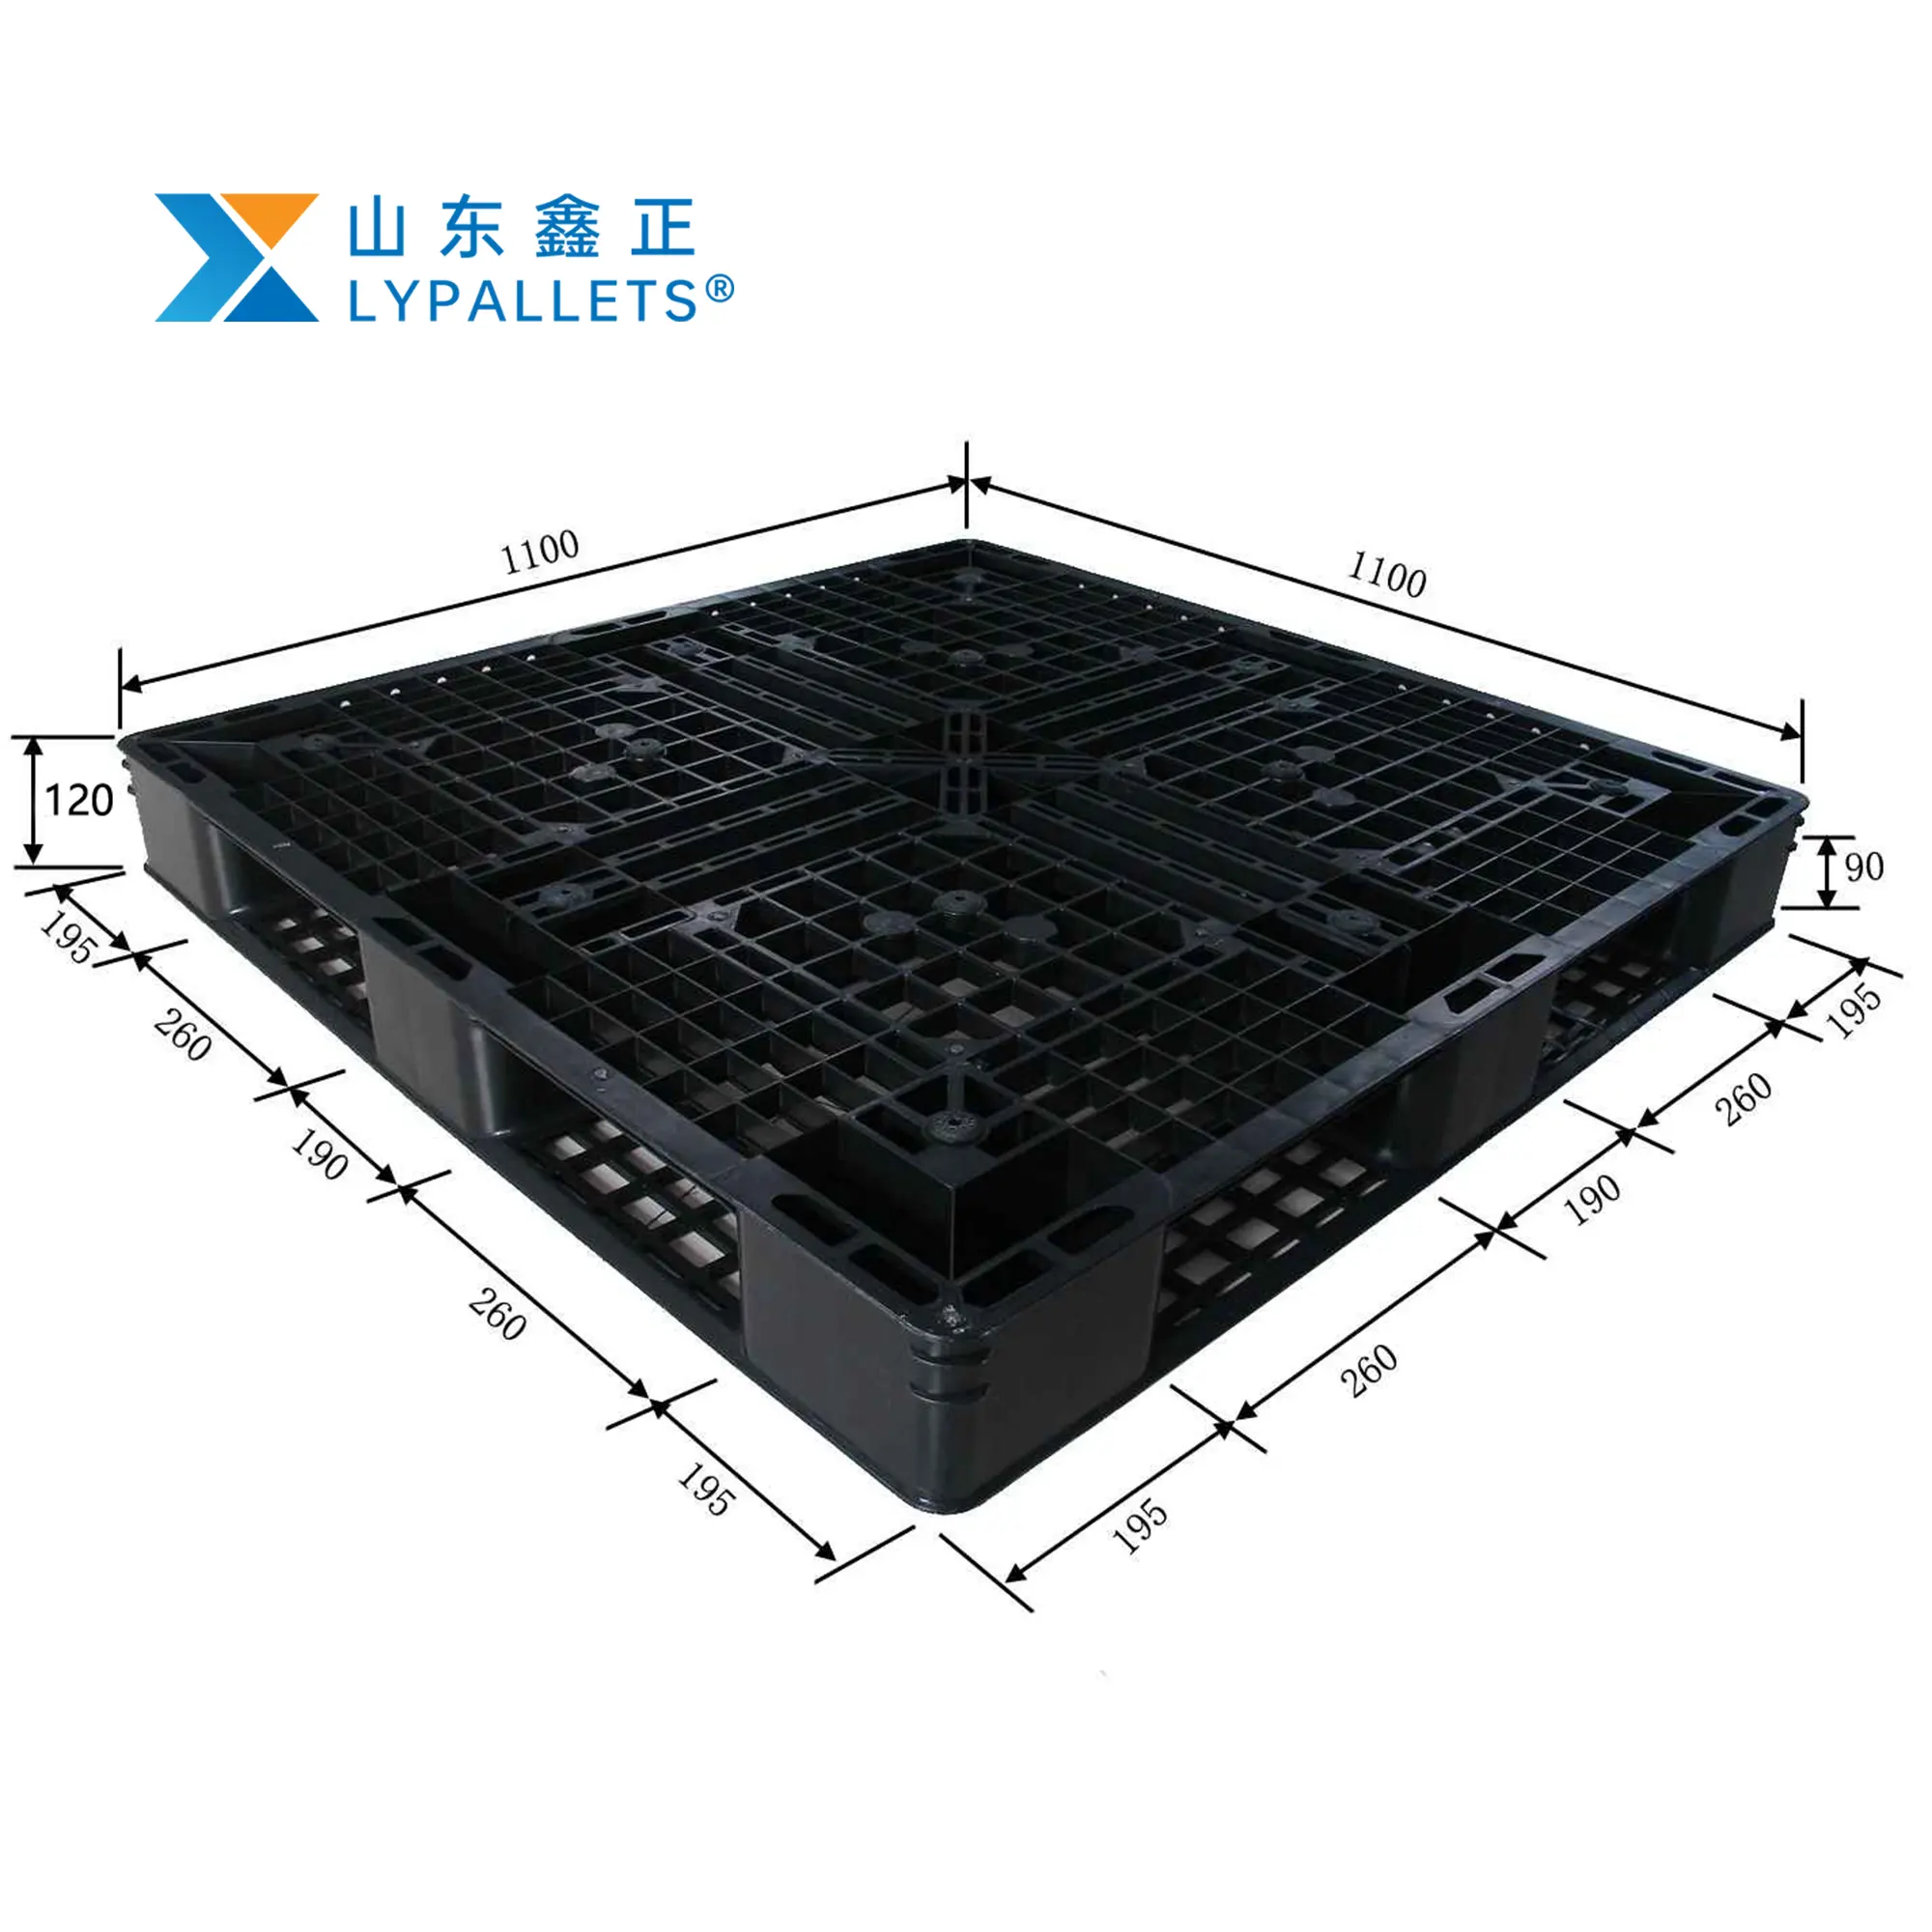 wholesale Lypallets 1100x1100 plastic pallet black hdpe stackable industrial one way export plastic pallet with best price